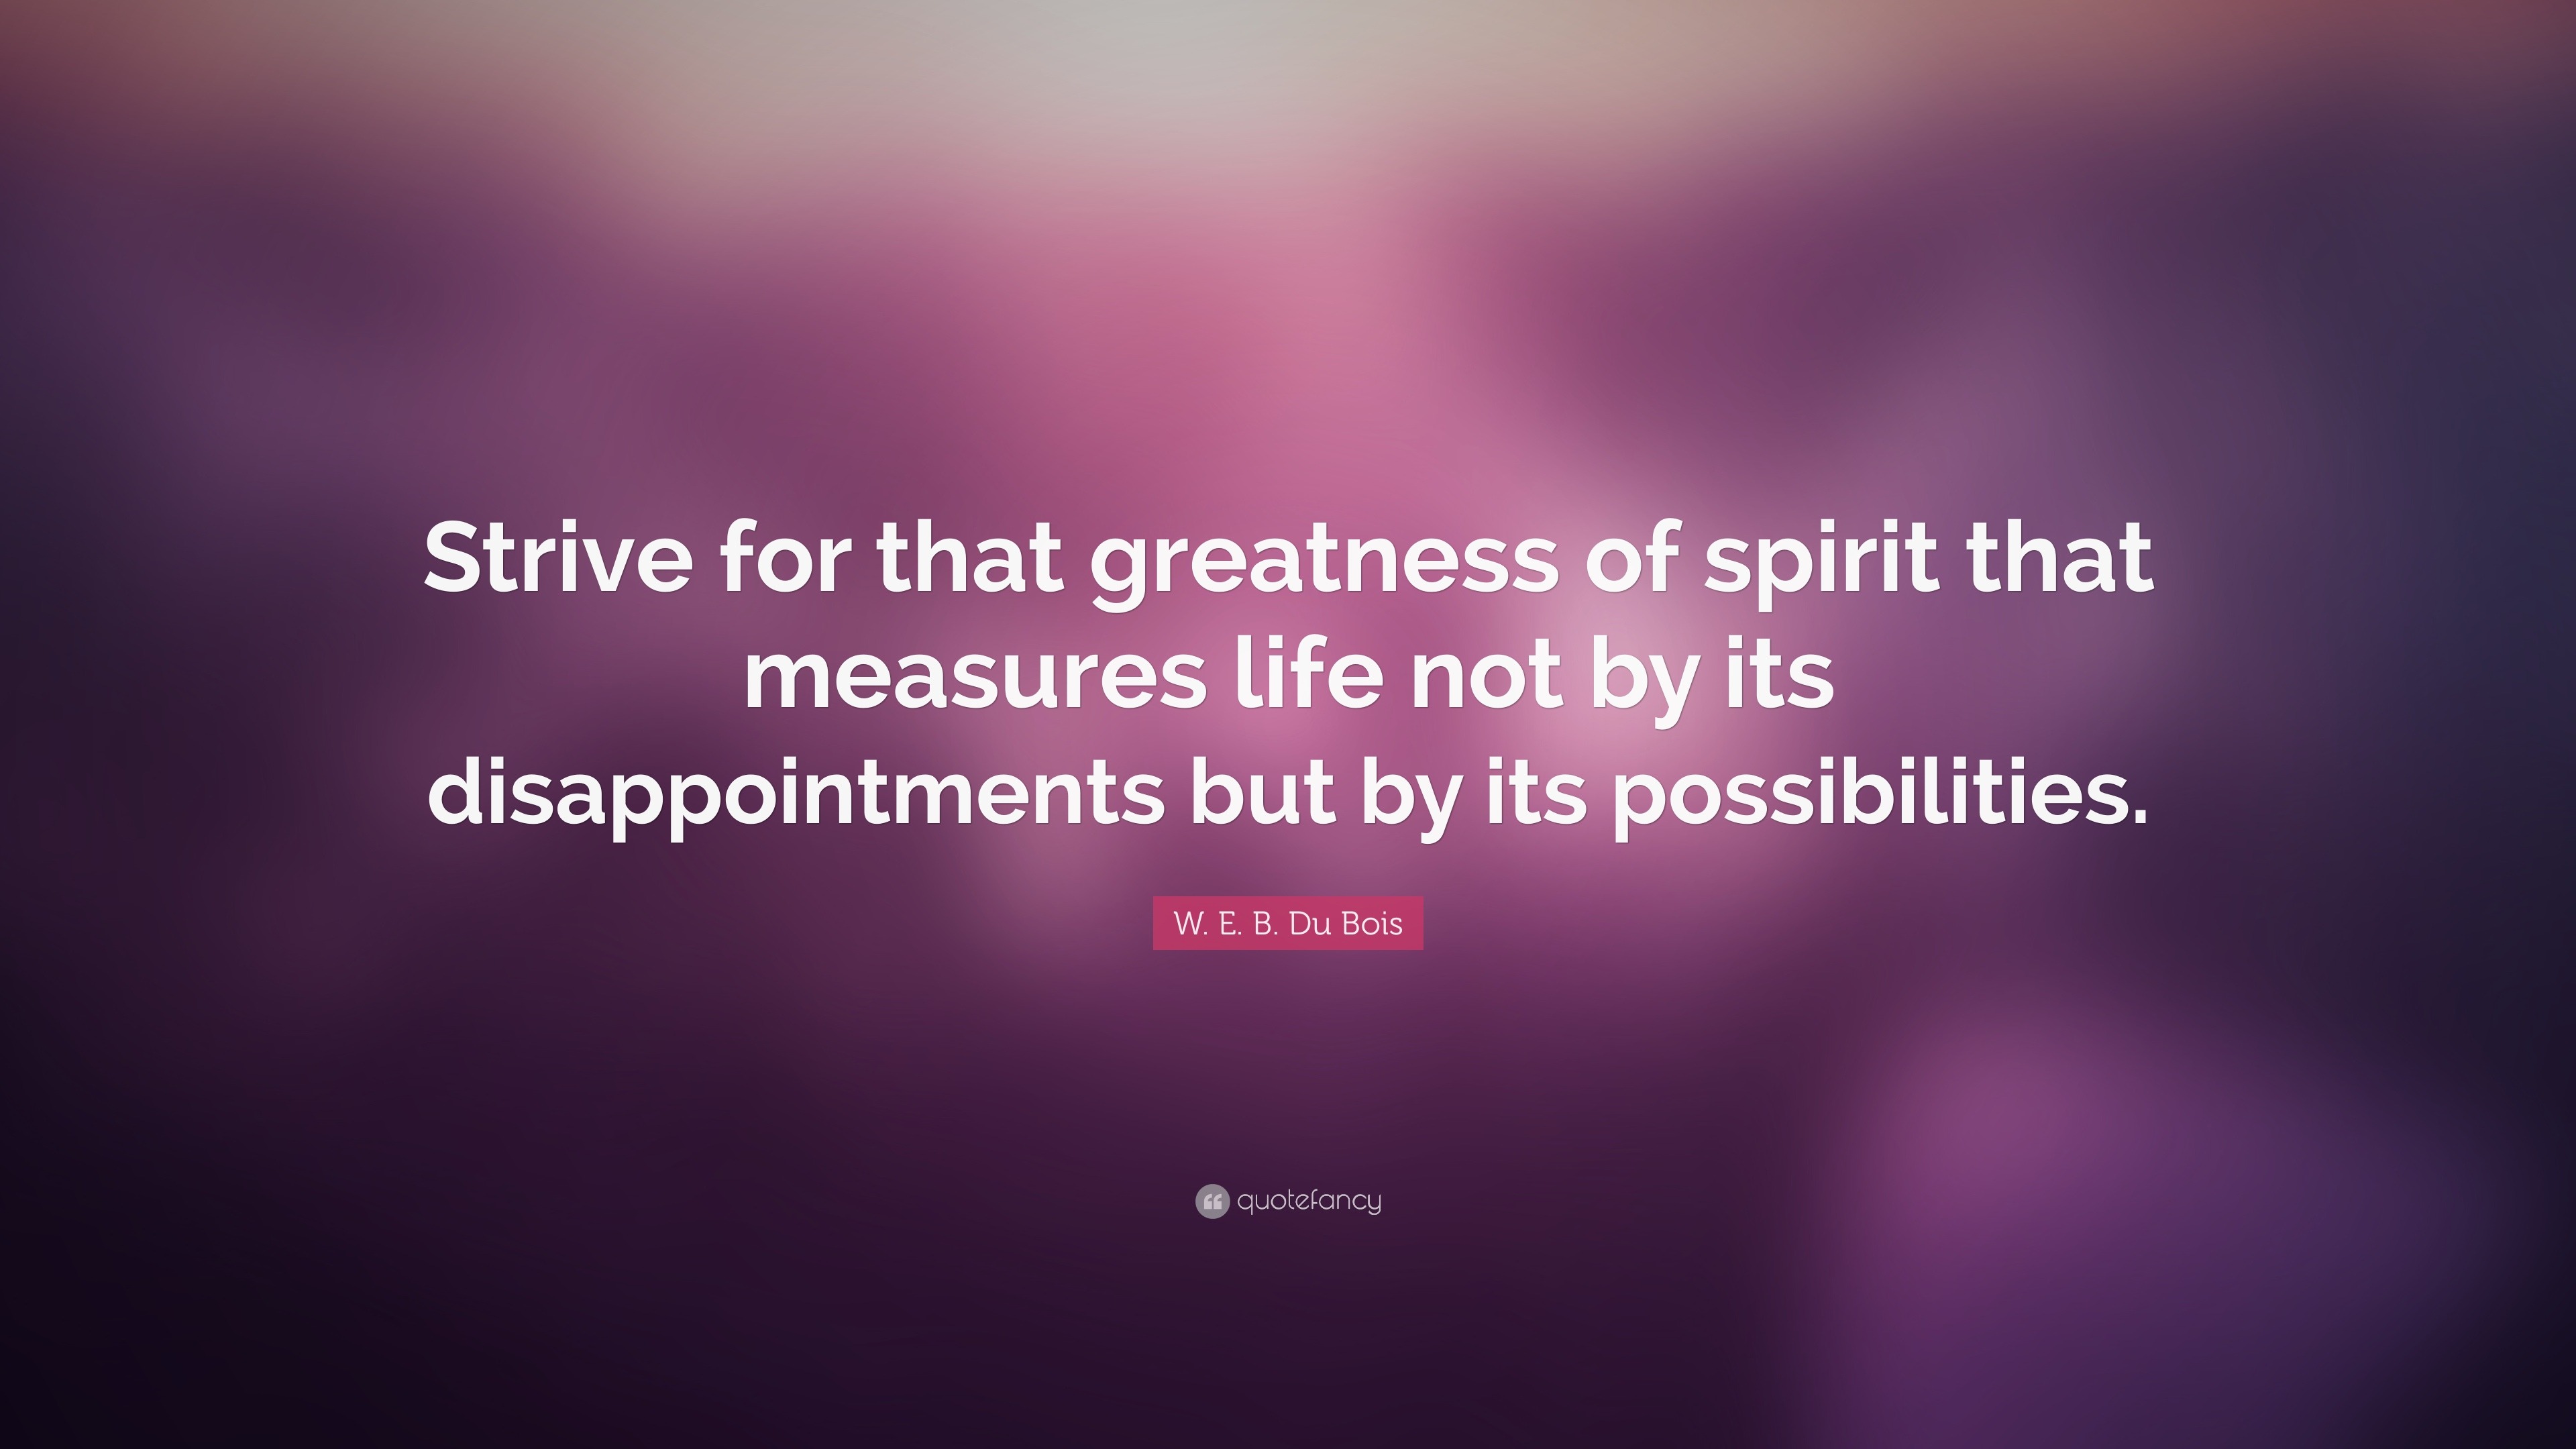 W E B Du Bois Quote “Strive for that greatness of spirit that measures life not